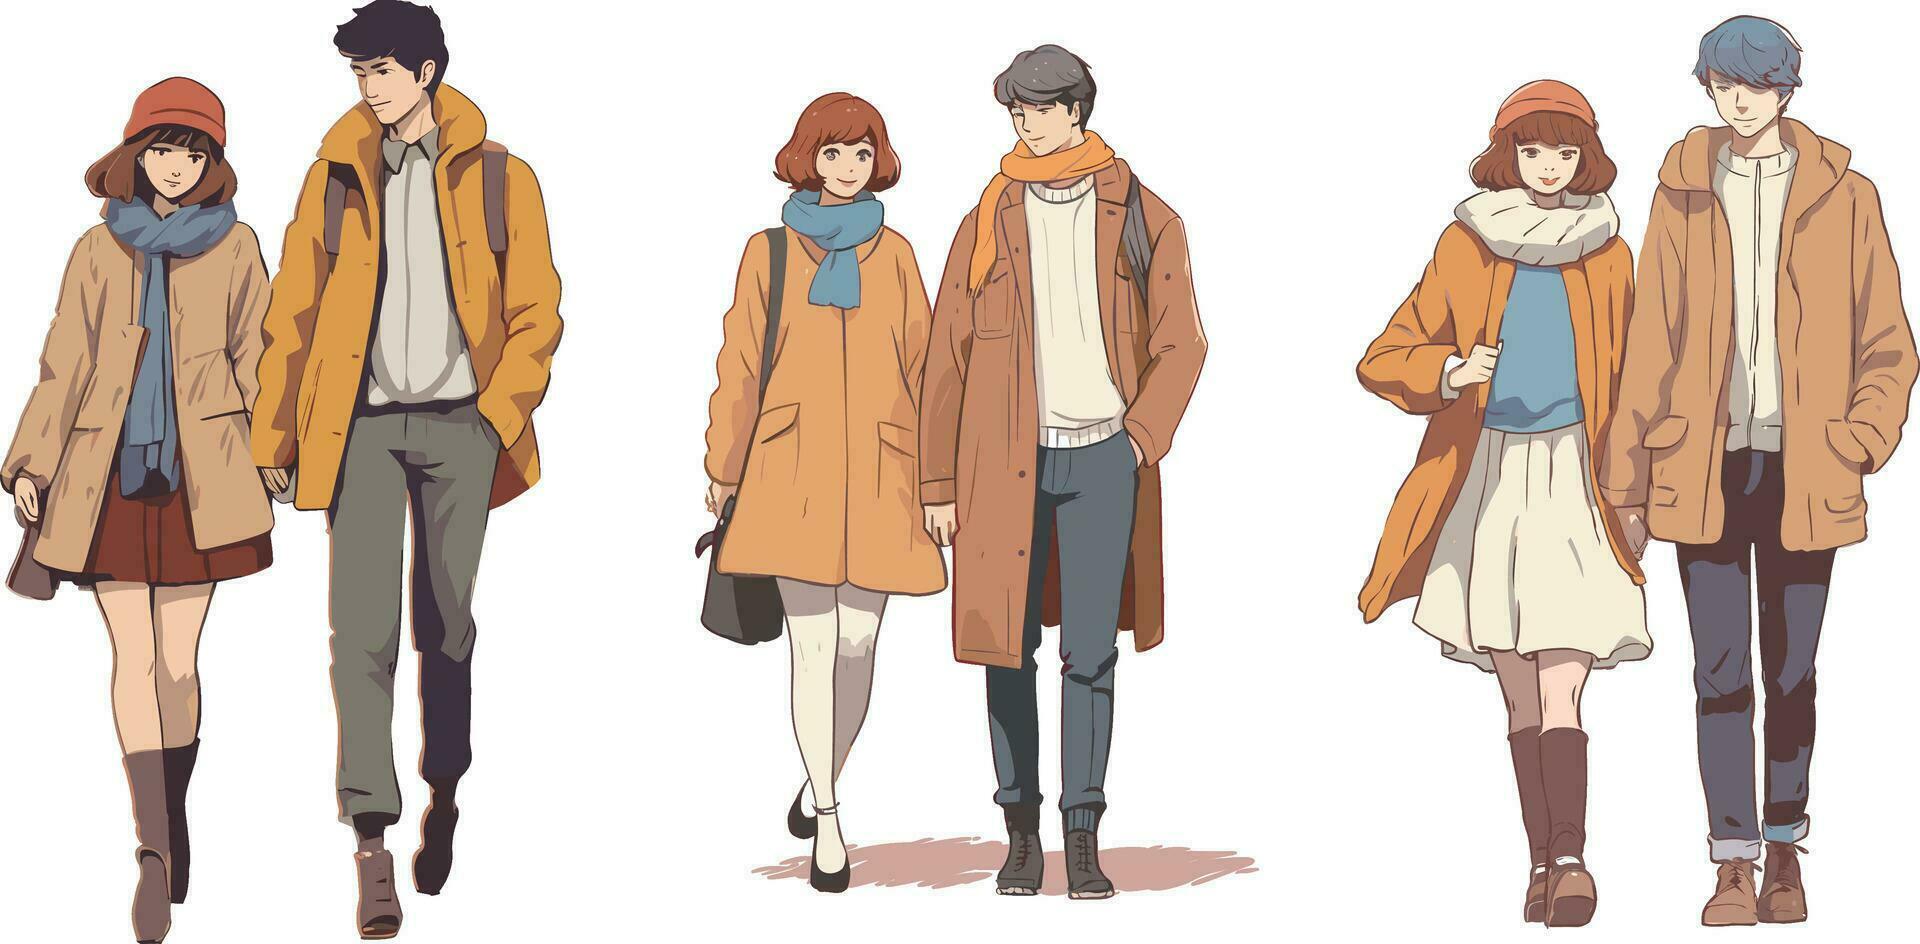 Fashionable young people in winter clothes. Vector illustration of men and women in warm clothing.